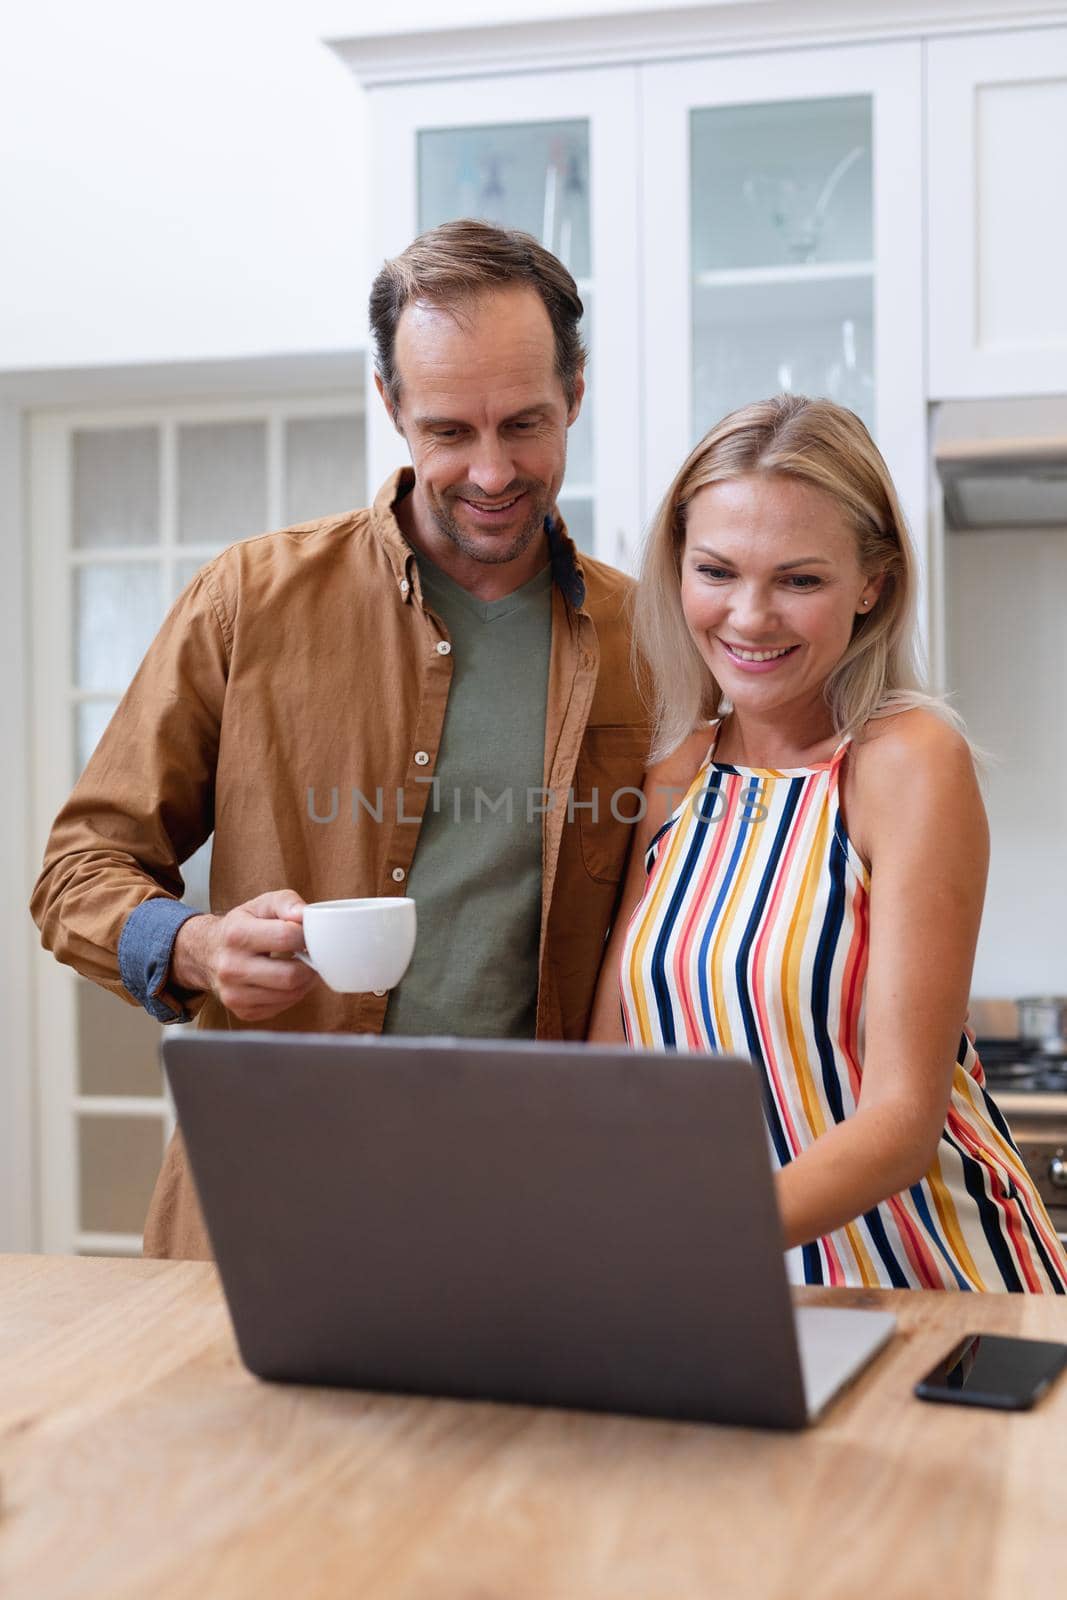 Smiling caucasian couple looking at laptop together and drinking coffee in kitchen. staying at home in isolation during quarantine lockdown.